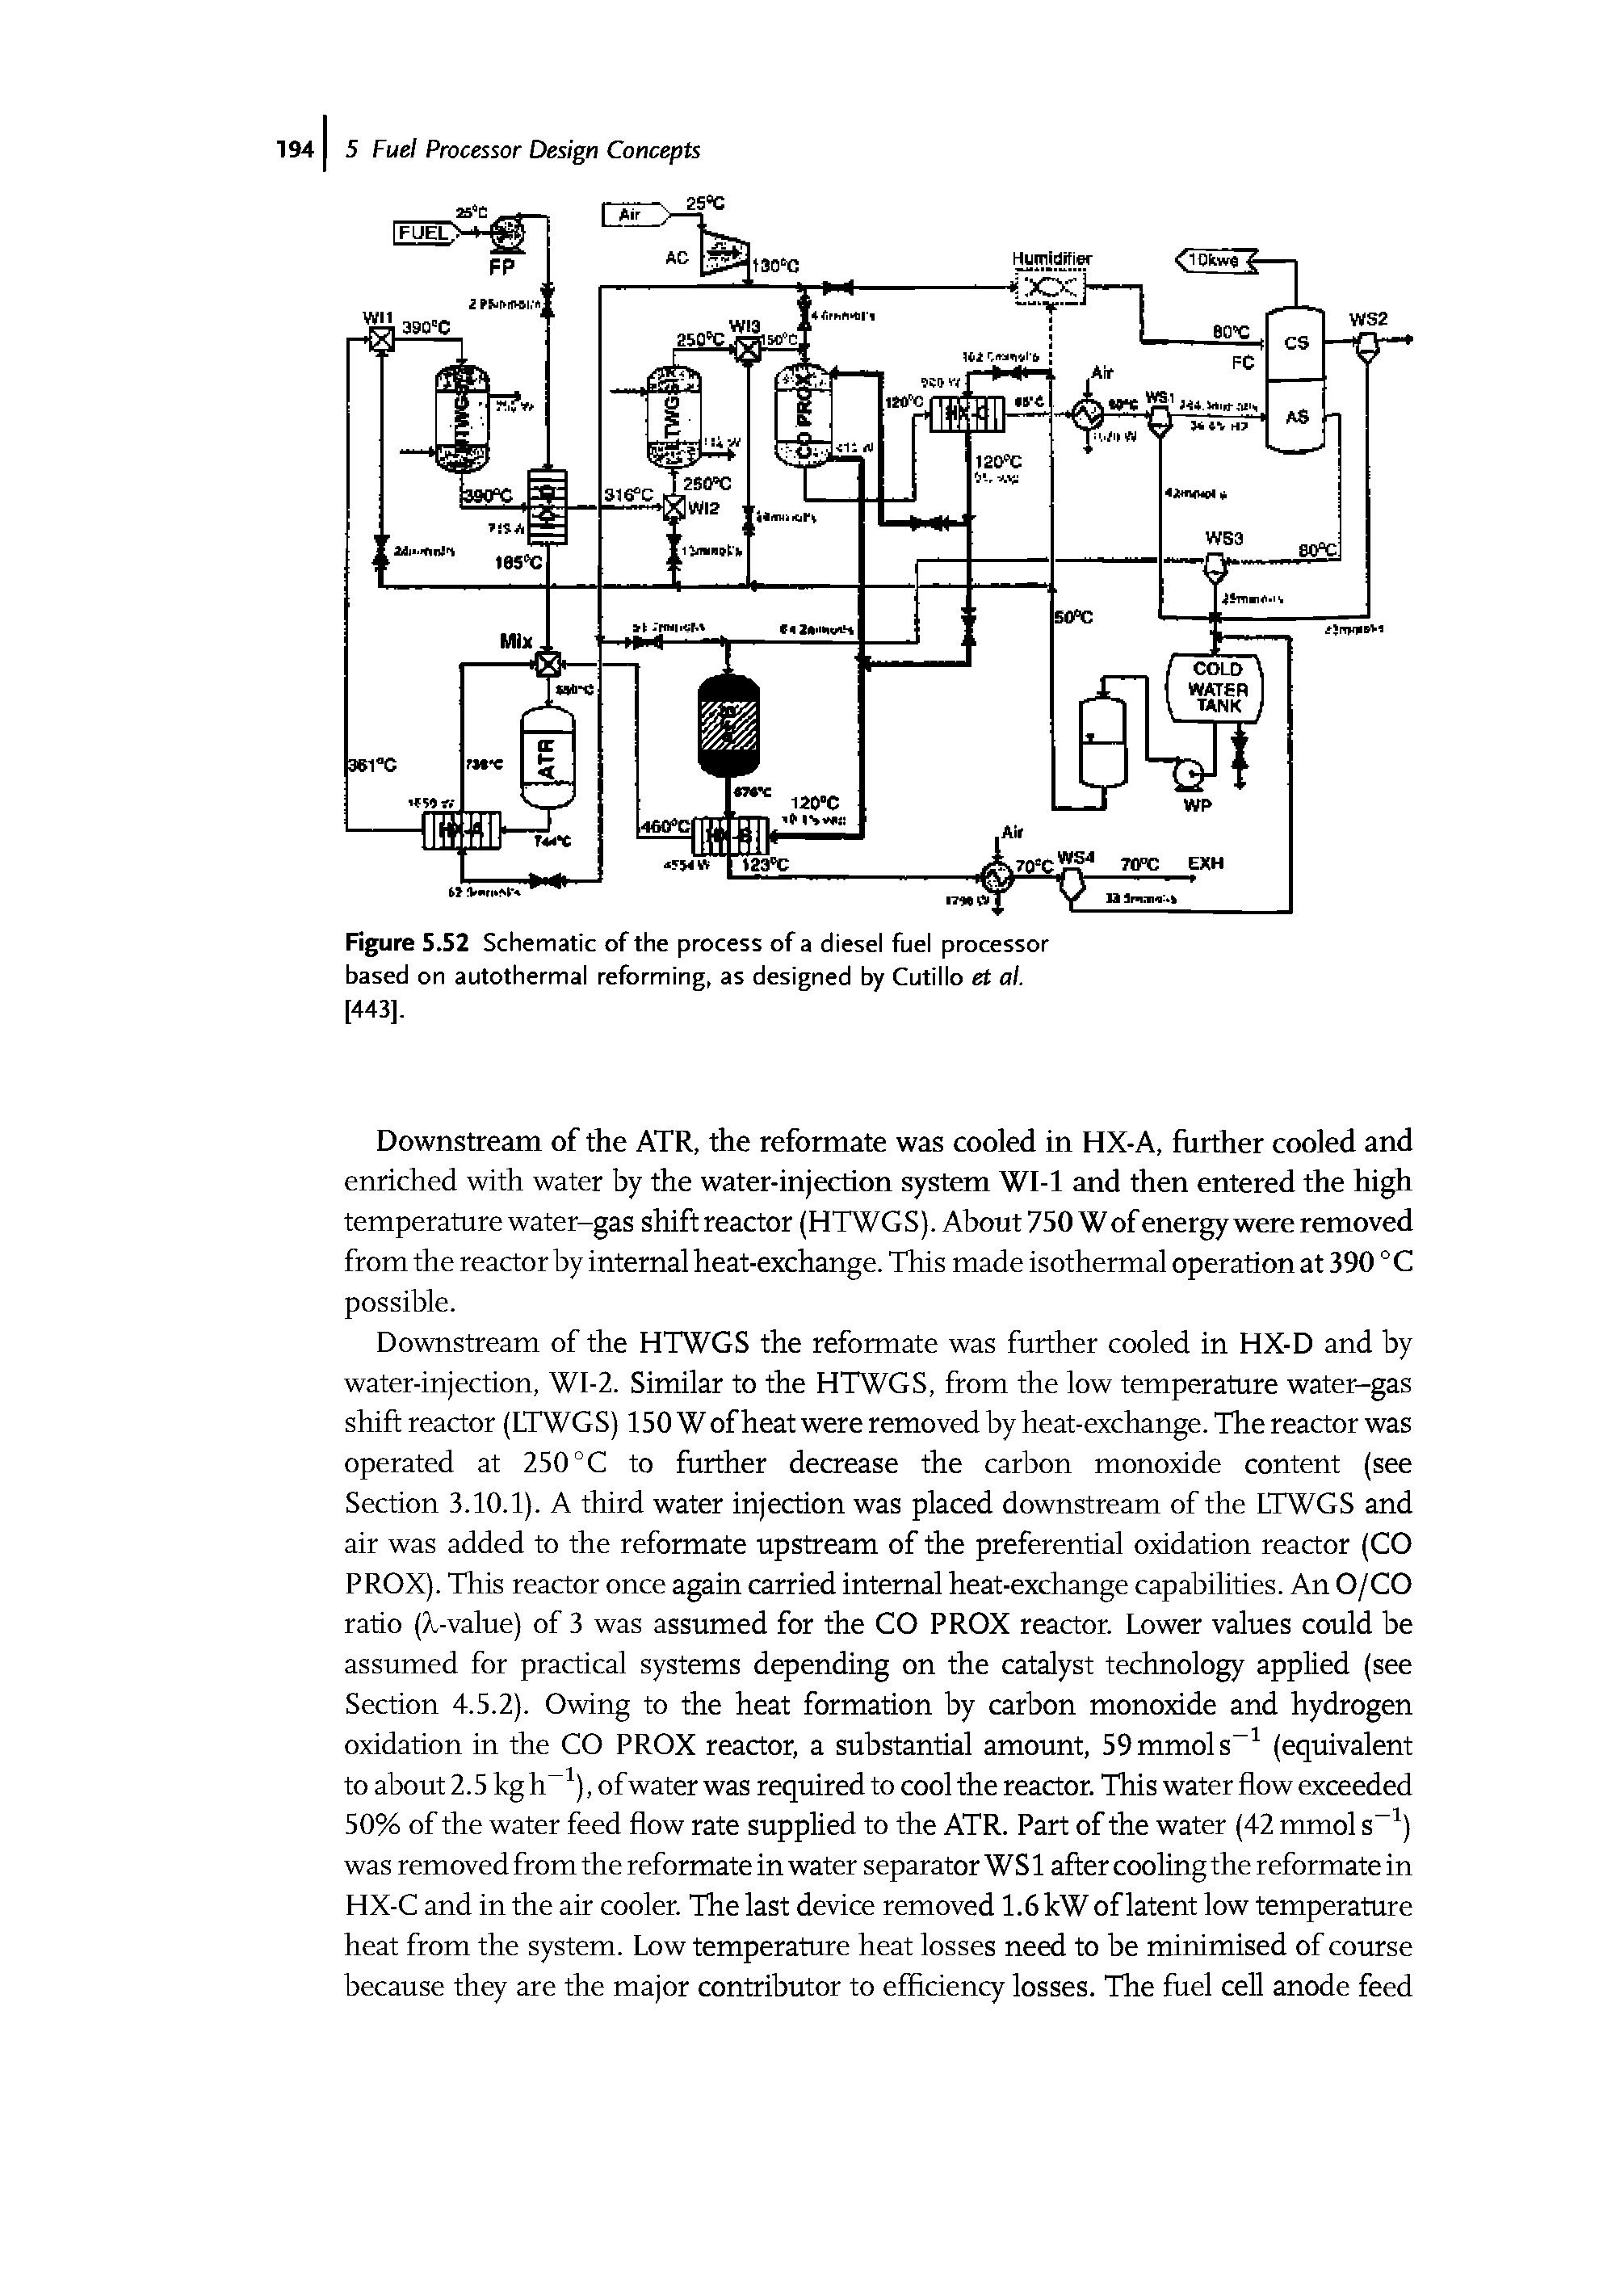 Figure 5.52 Schematic of the process of a diesel fuel processor based on autothermal reforming, as designed by Cutillo et al. [443],...